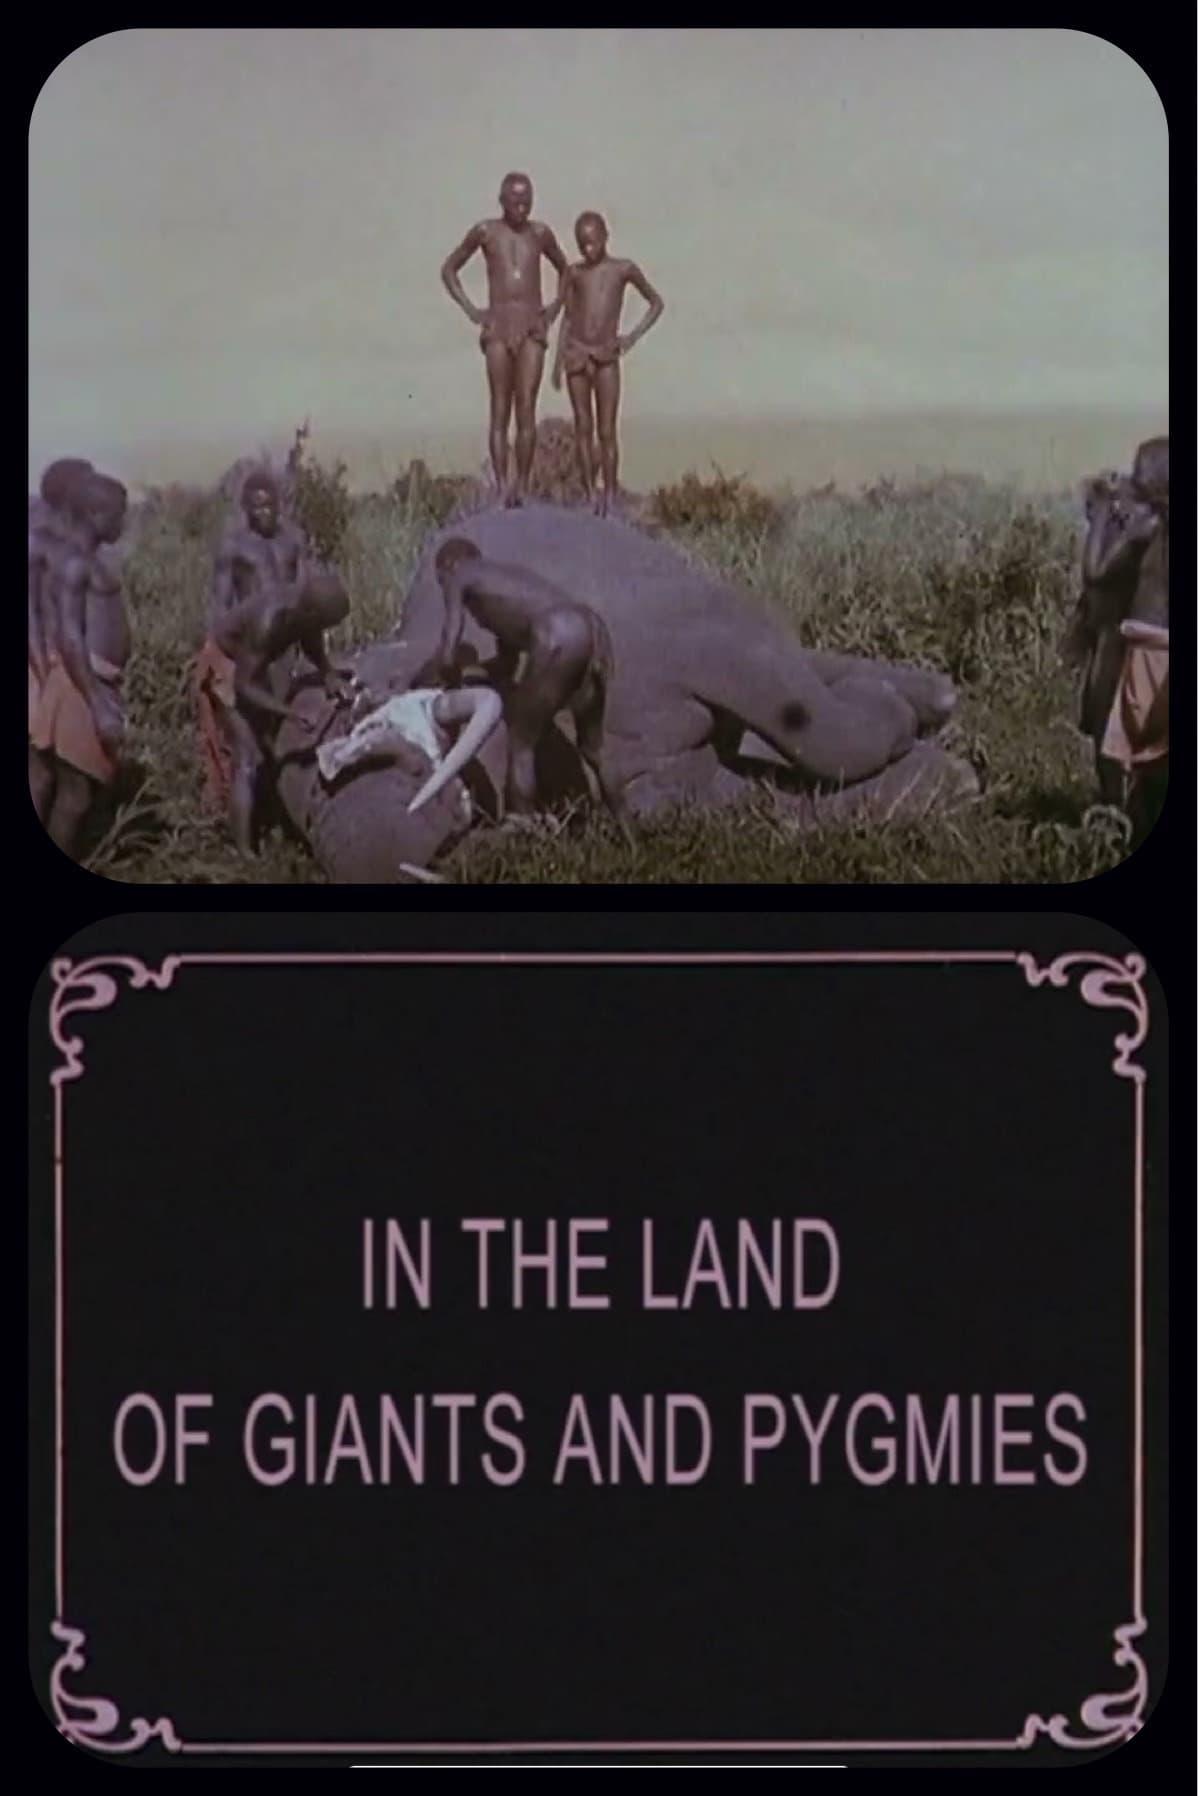 In the Land of Giants and Pygmies poster